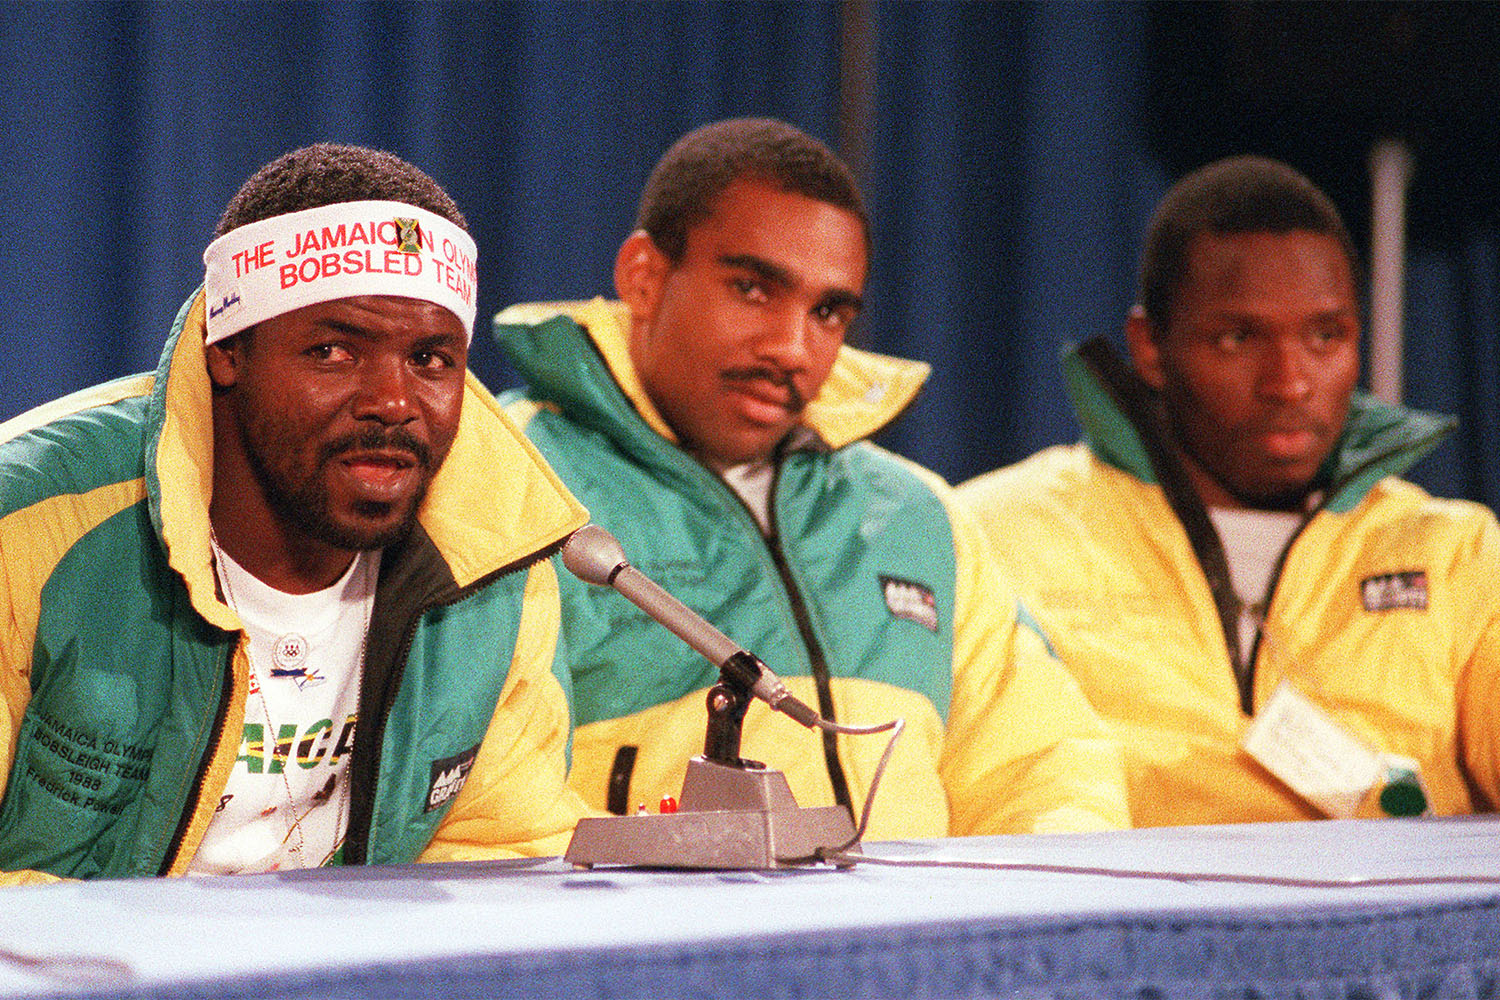 Three members of the Jamaican Bobsled team at a press conference, 1988